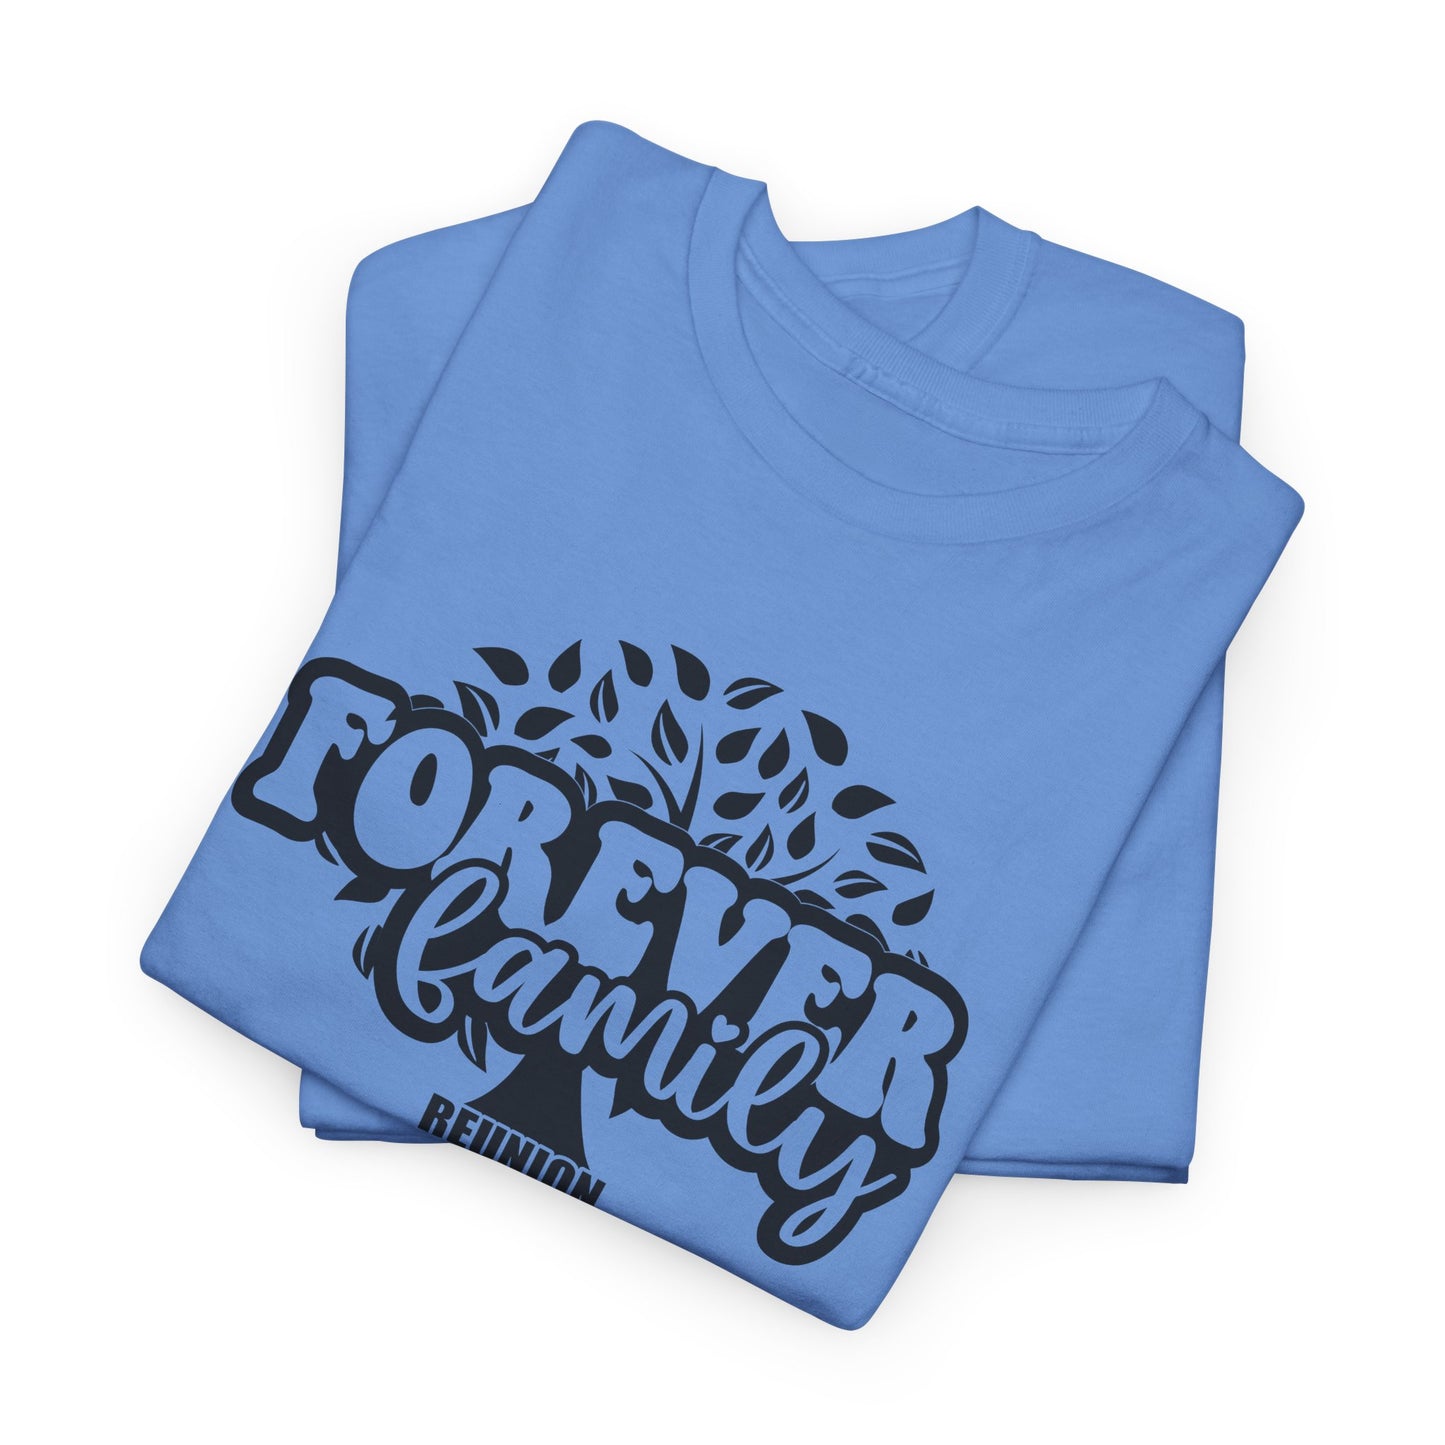 Forever Family - Craftee Designs & Prints 